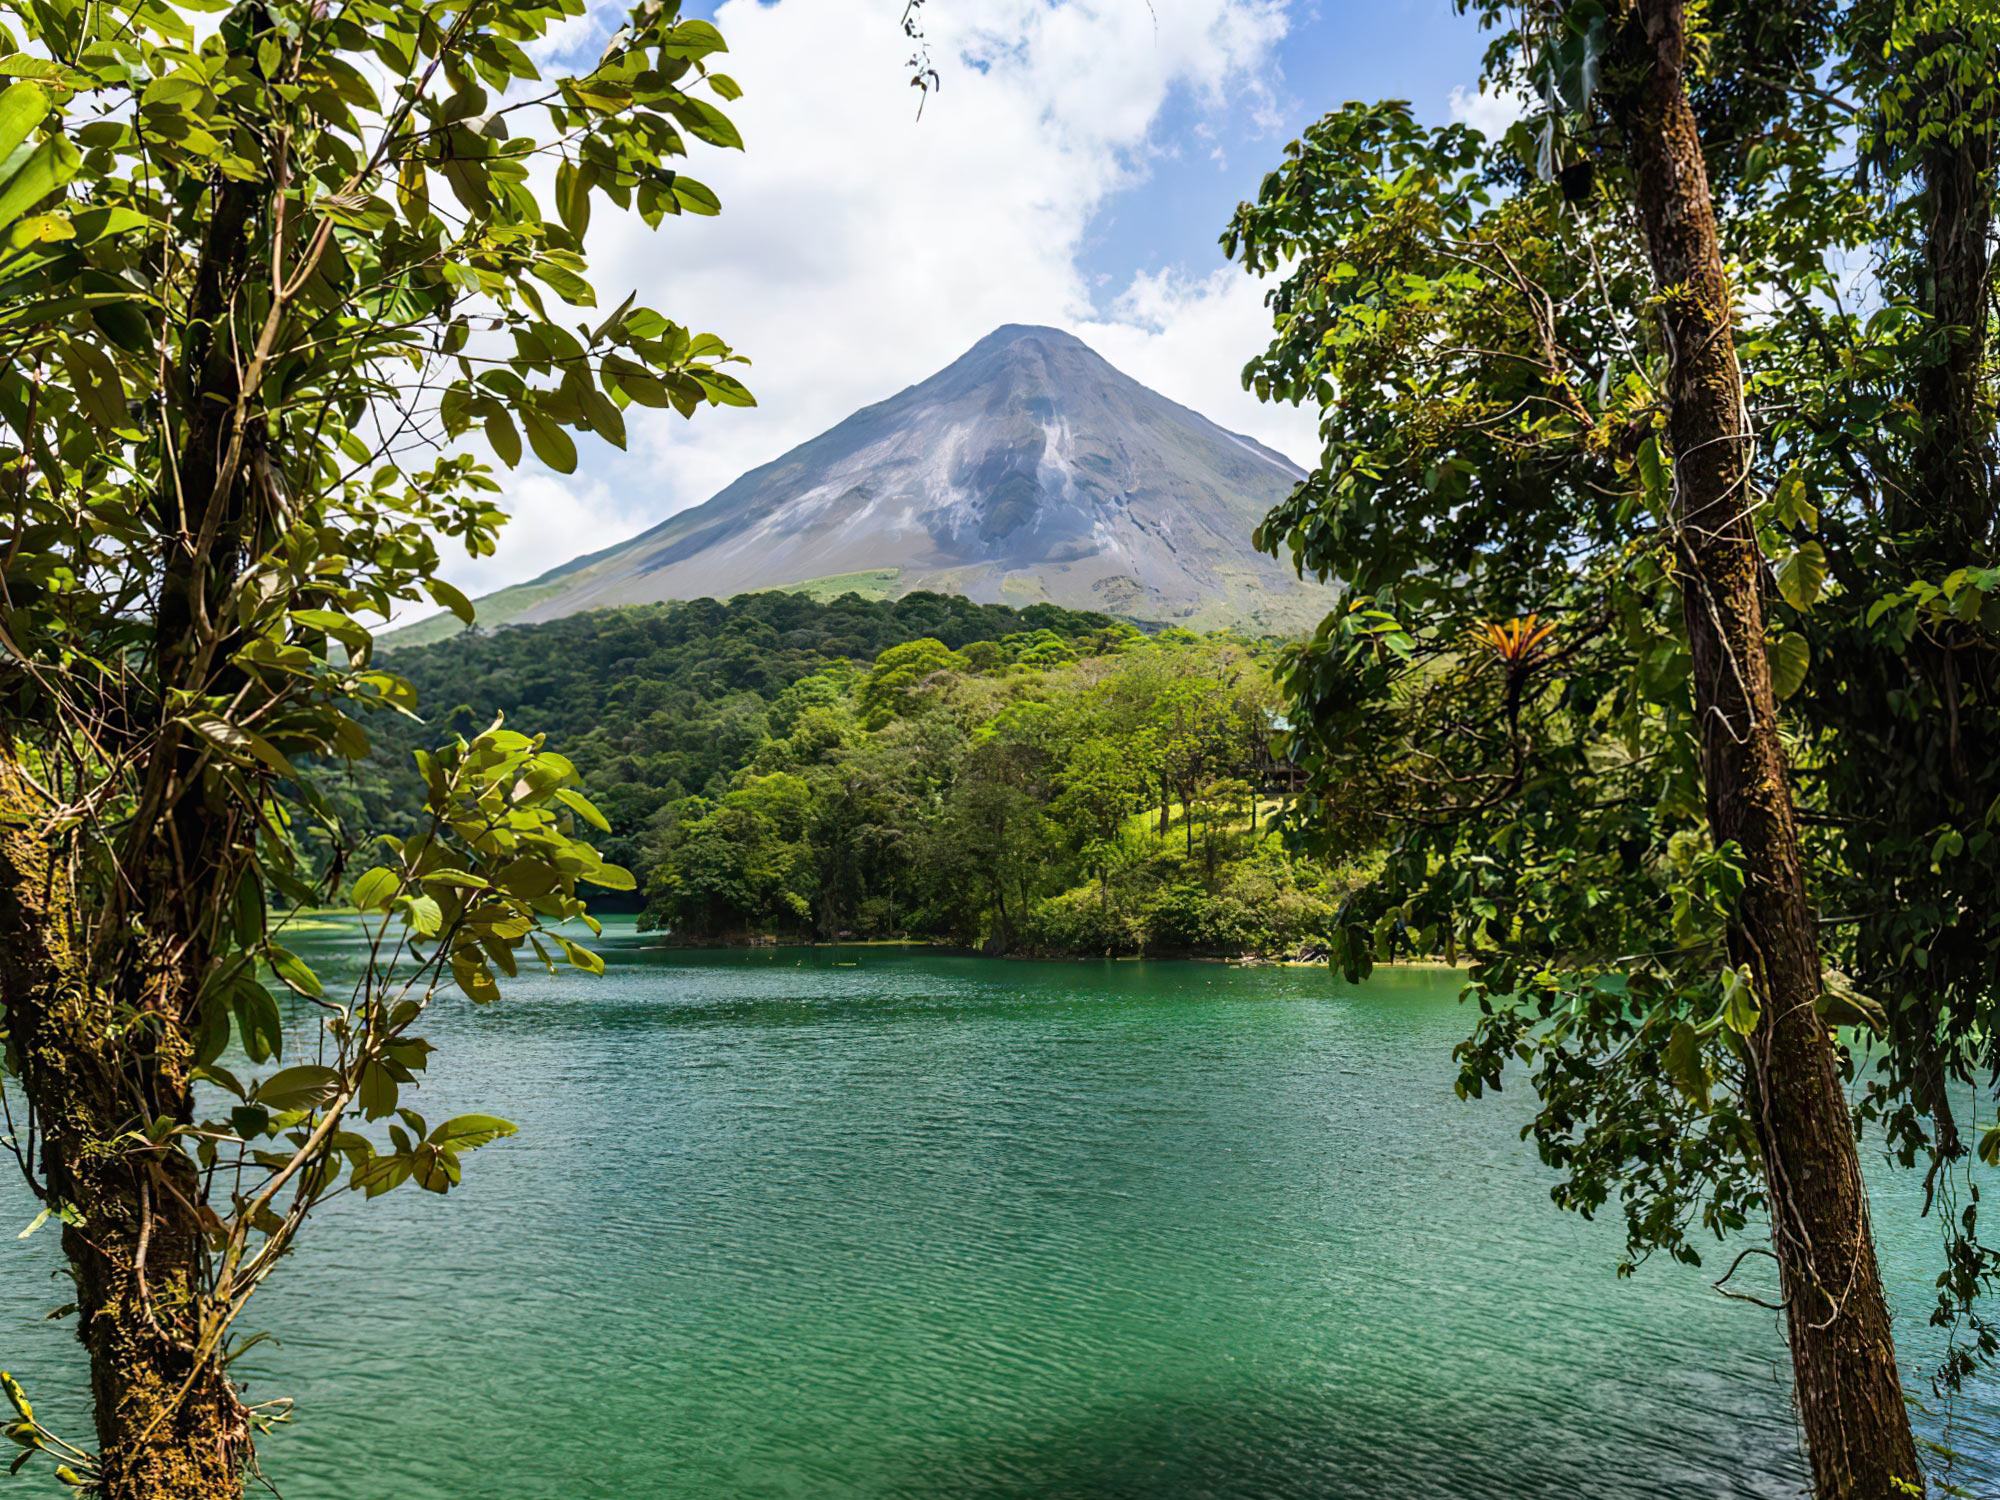 Costa Rica open to U.S. tourists in September